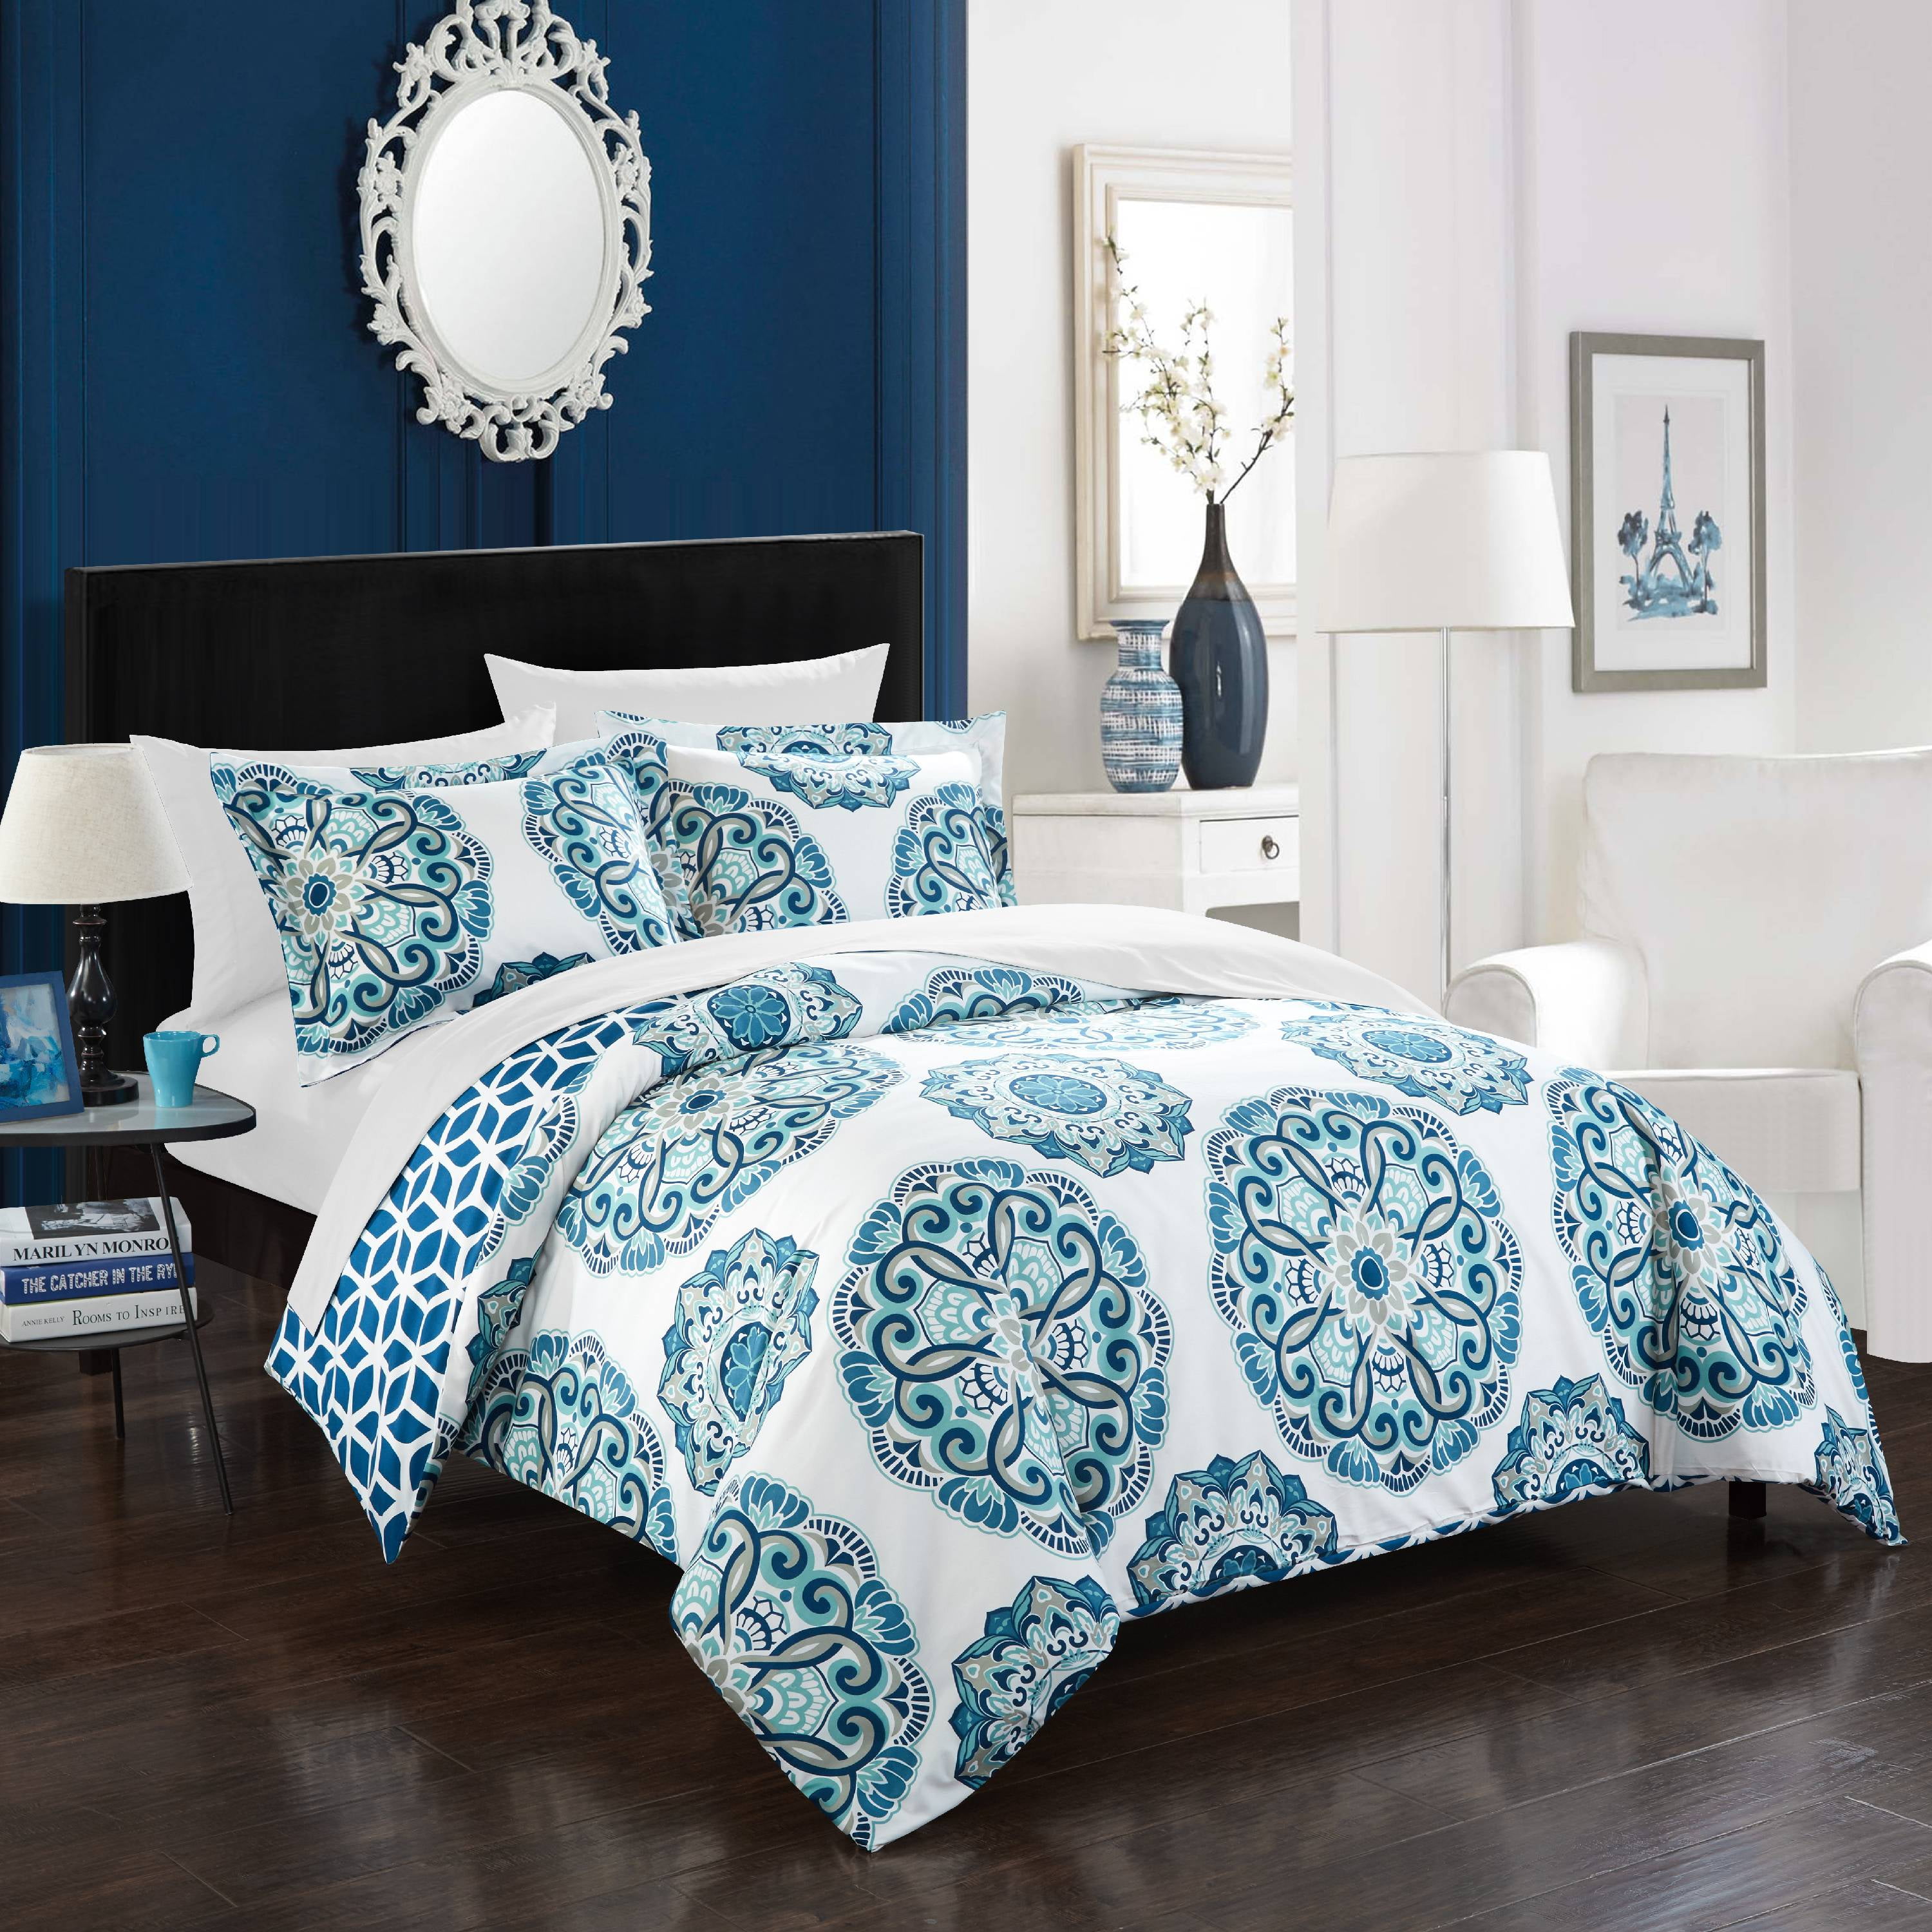 Reversible Printed Comforter Cover 3 Pcs Patterned Duvet Cover Bed Set All Sizes 